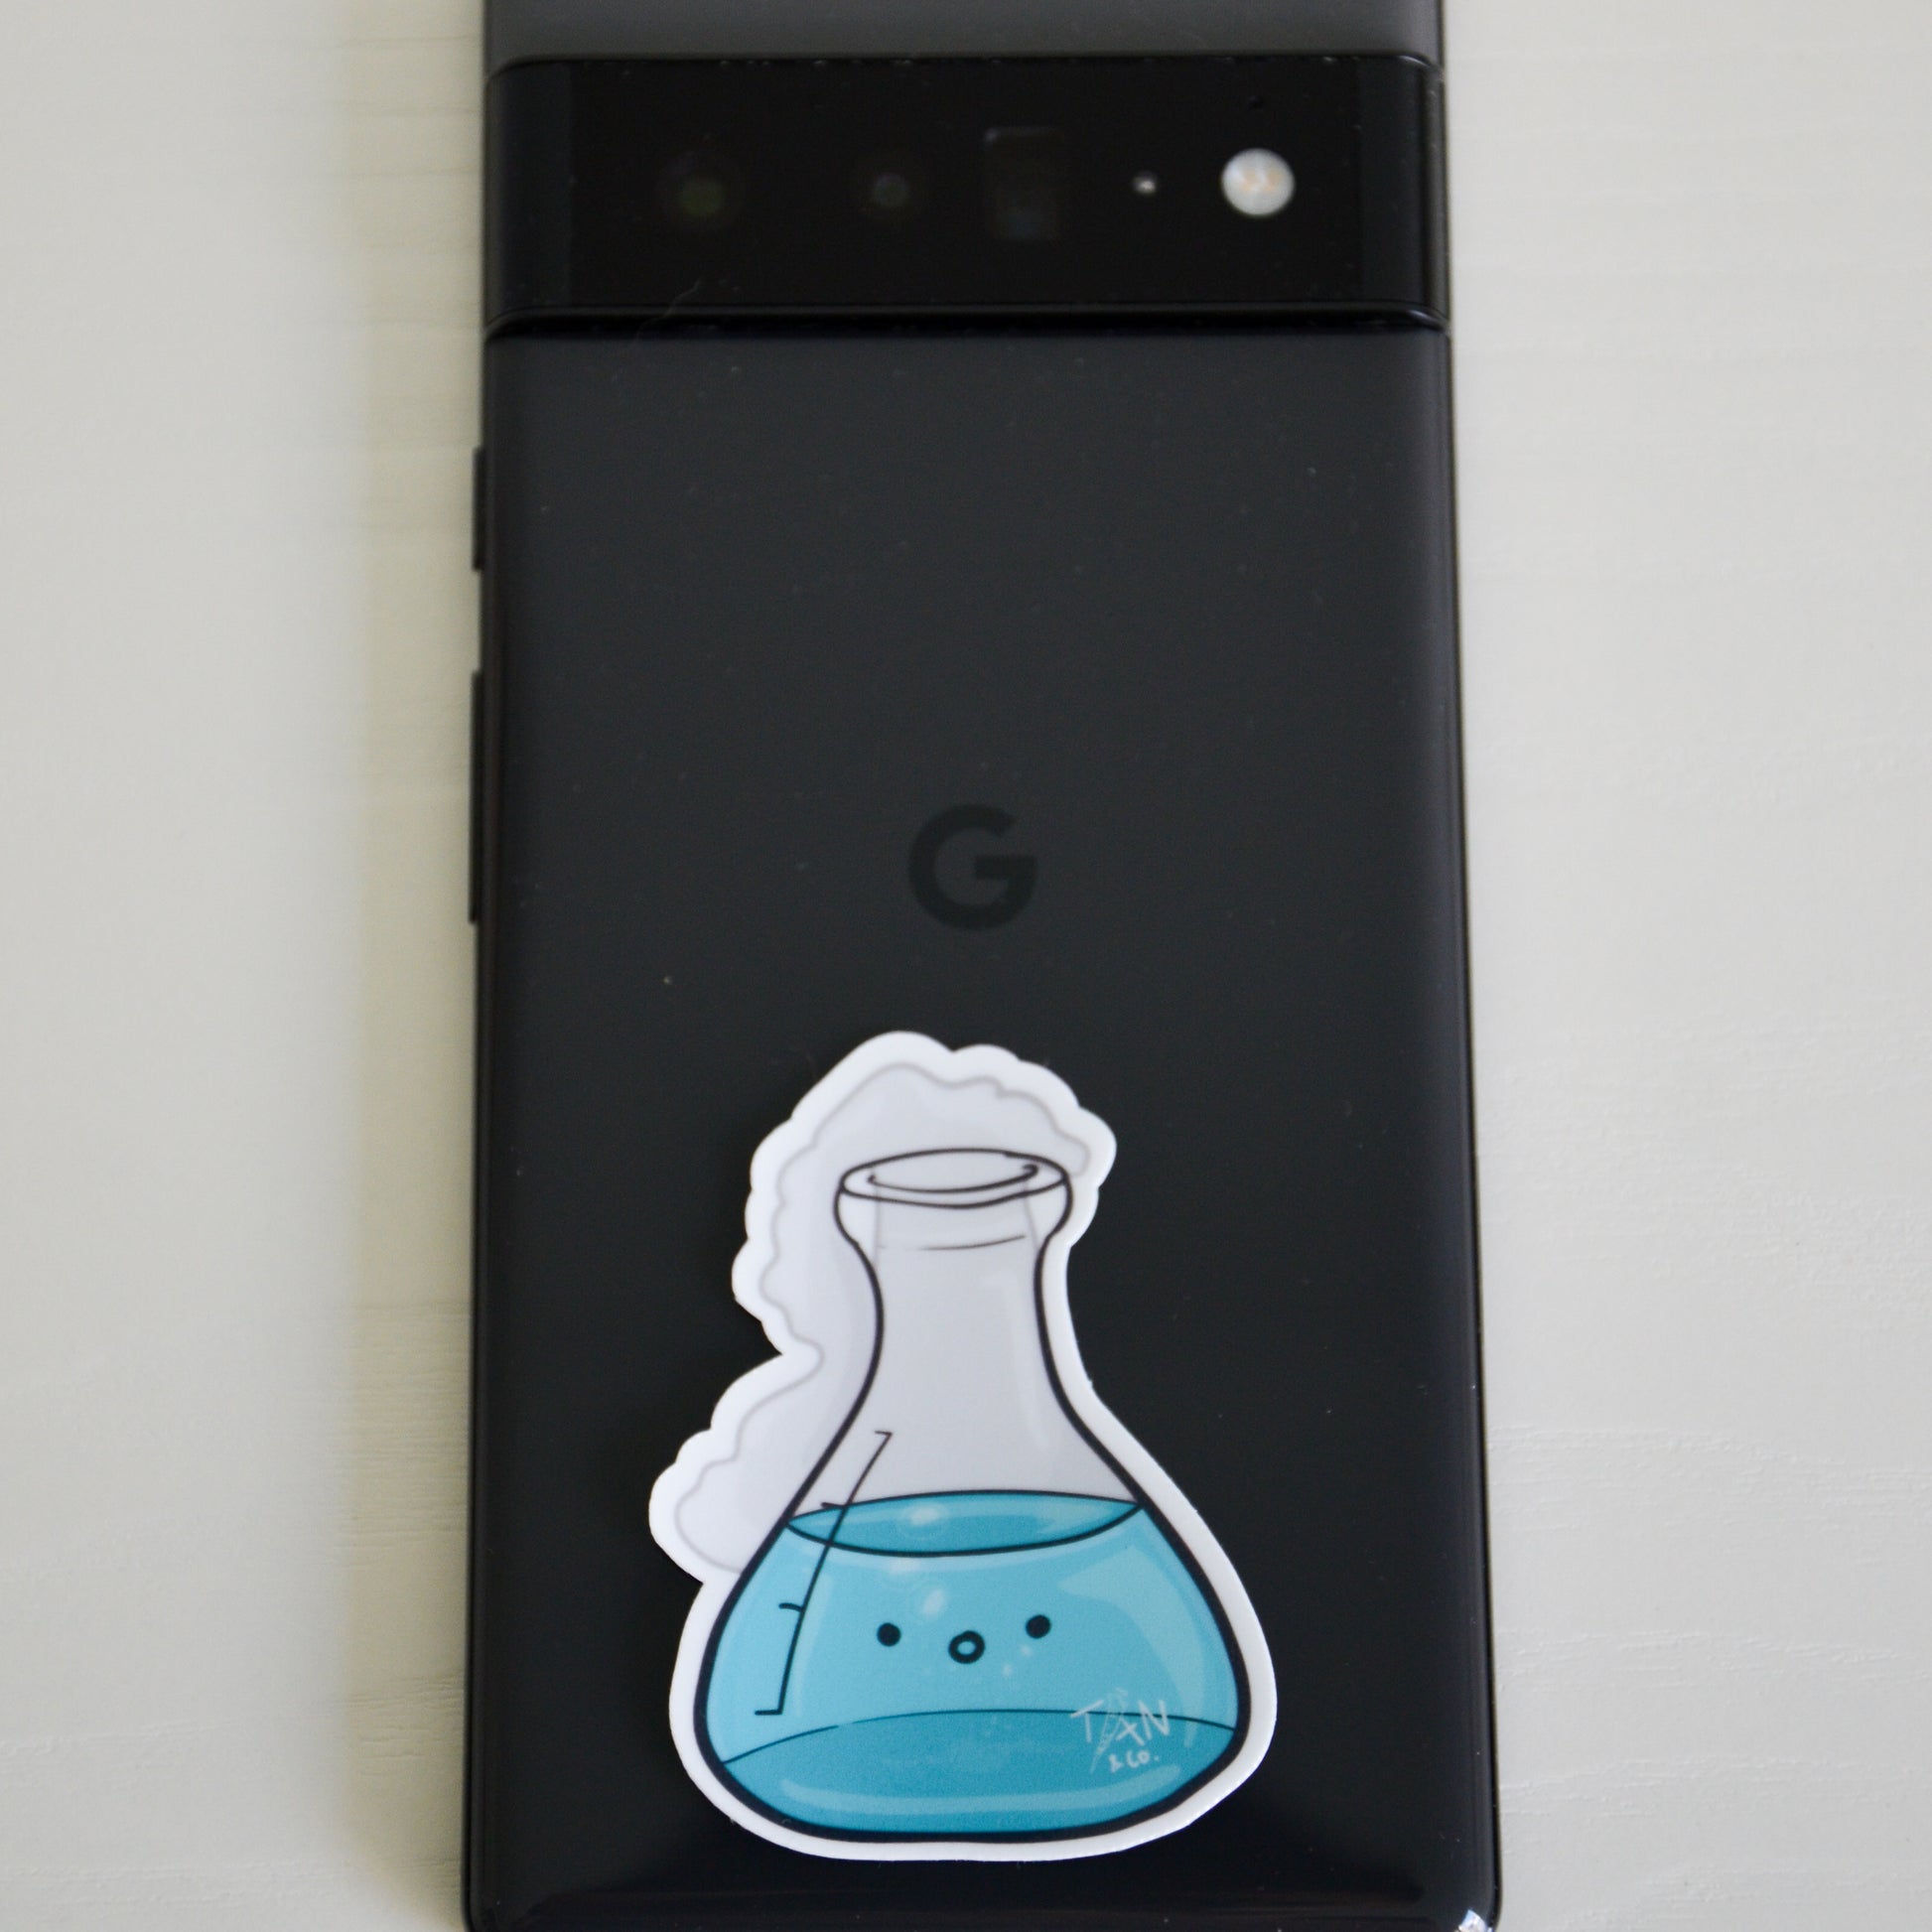 Teal conical flask on phone